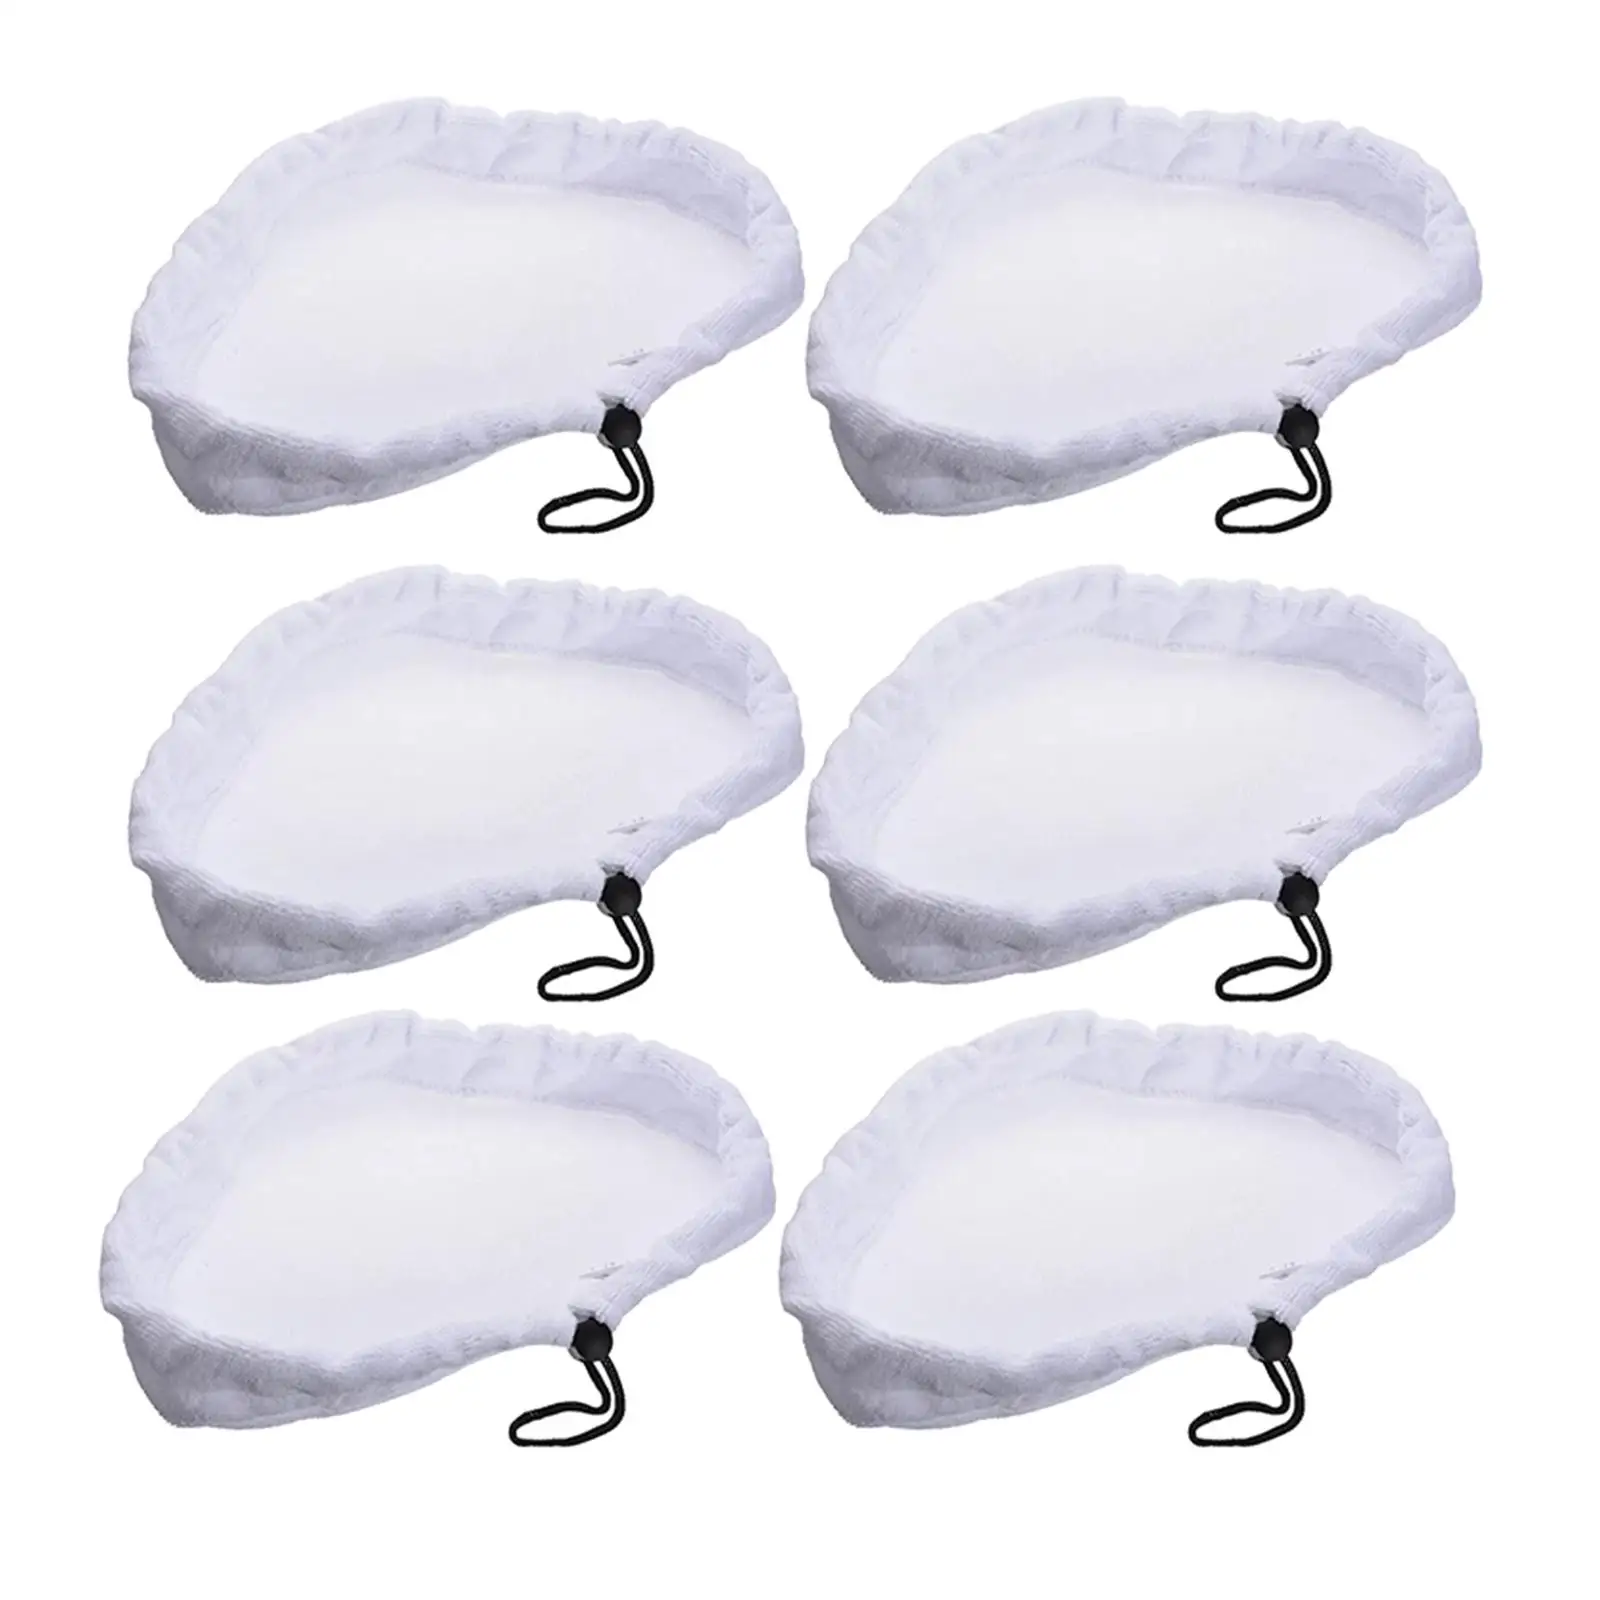 6Pcs Fiber Home Clean Steam Mop Water Absorbent Reusable Washable Durable for x5 S302 S001 Steam Mop Accessories